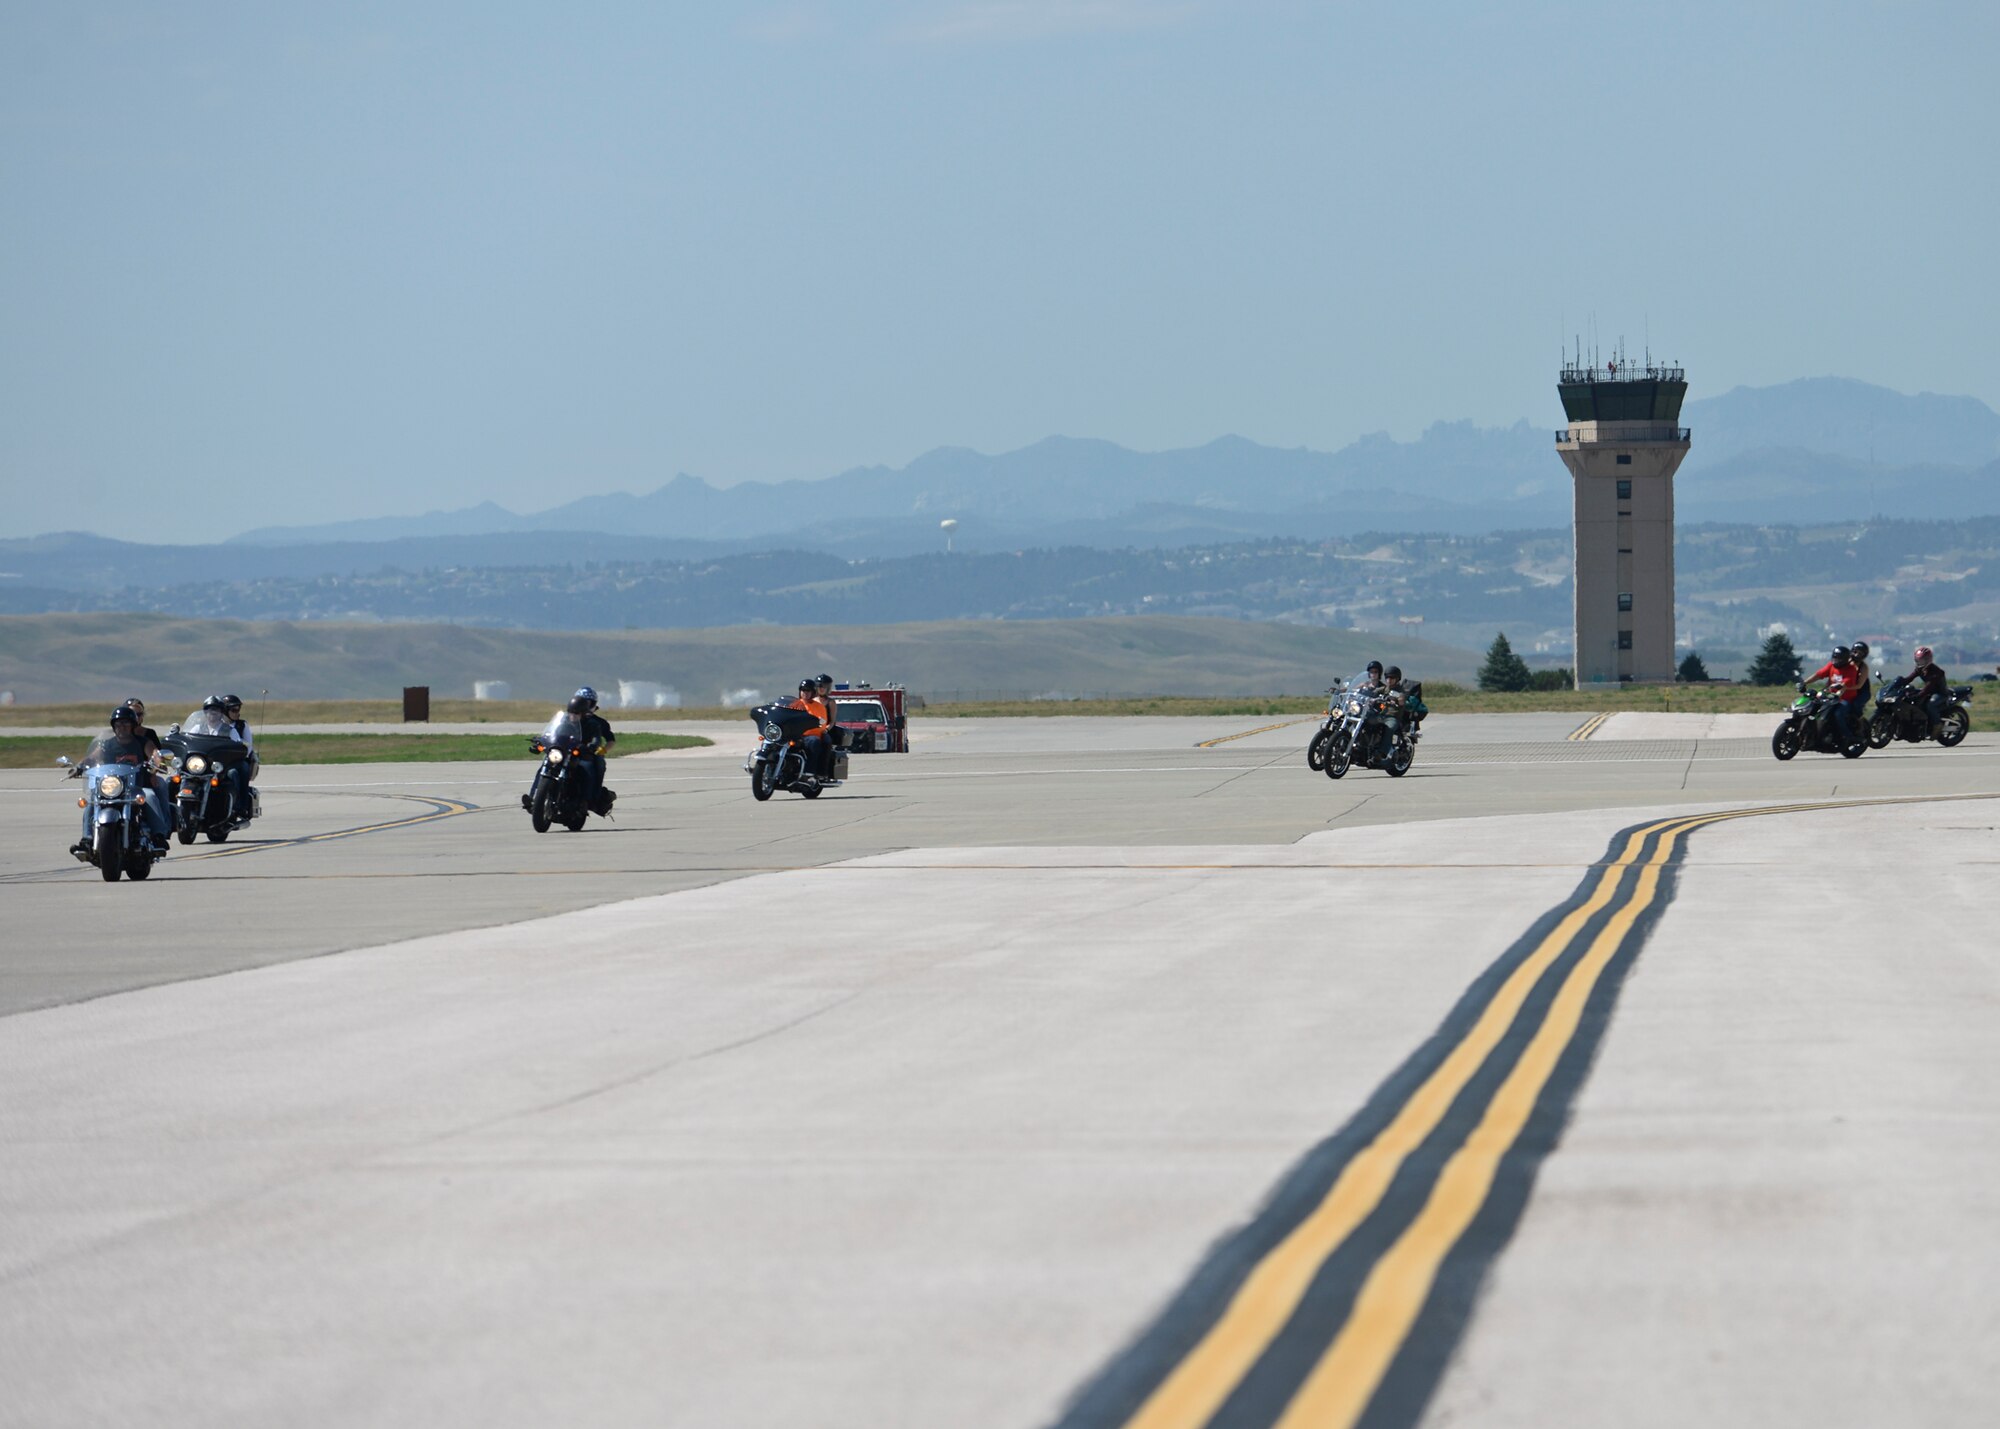 More than 200 Airmen, family members and civilian motorcycle enthusiasts participated in this year’s 16th Annual Dakota Thunder Run at Ellsworth Air Force Base, S.D., Aug. 9, 2016. The event, hosted by the Green Knights Dakota Thunder Motorcycle Club, began on the flight line and offered active military members and veterans the opportunity to tour and photograph a B-1 bomber static display before riding to Sturgis. (U.S. Air Force photo by Senior Airman Anania Tekurio/Released)